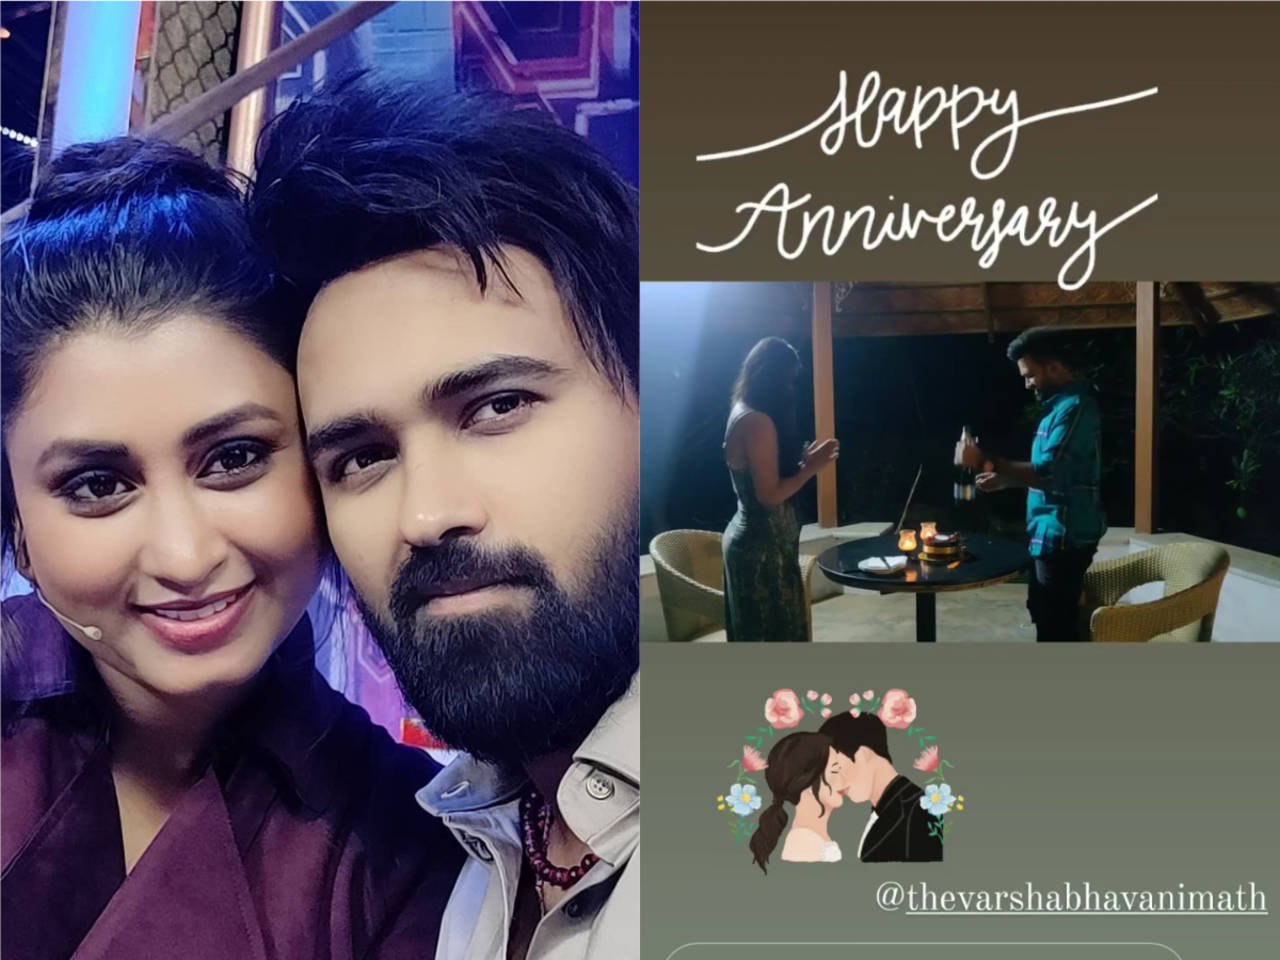 Dancee+ judge Yashwant Master wishes wife Varsha on their 2nd wedding anniversary; shares mushy pictures from their date night picture